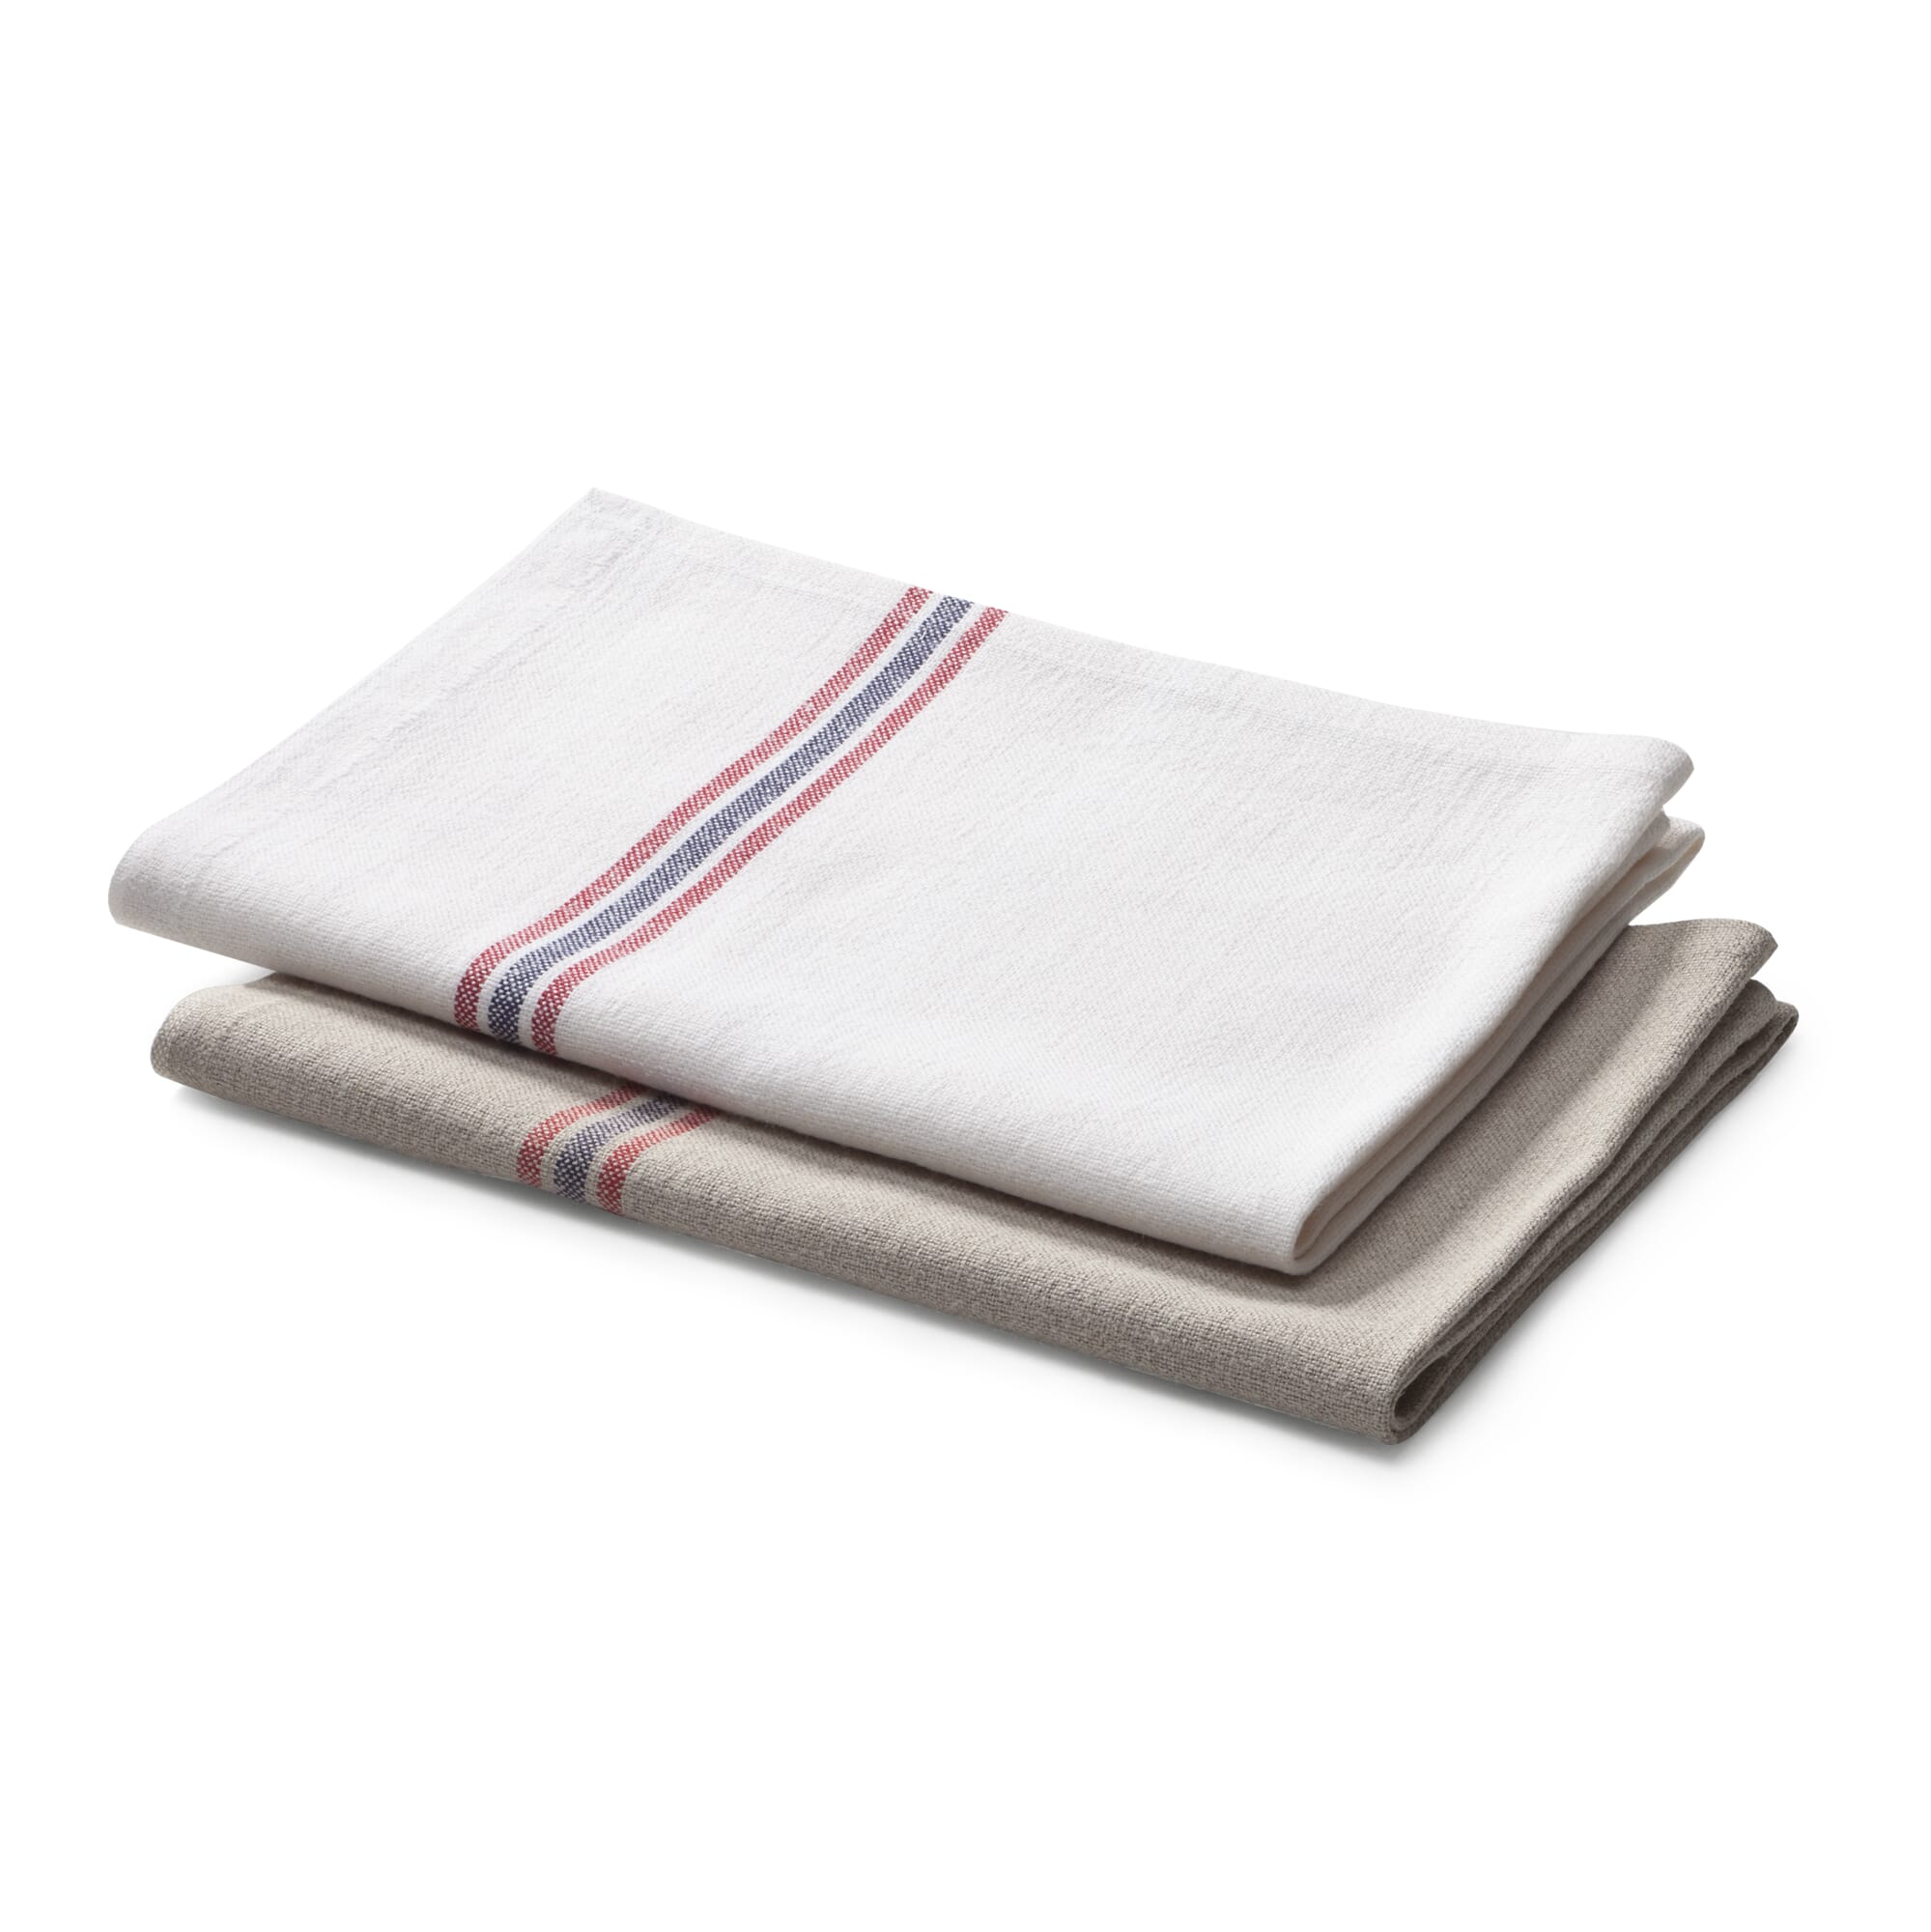 French Stripe Linen Towel, Rustic Kitchen Towels, Set of 34 Heavy